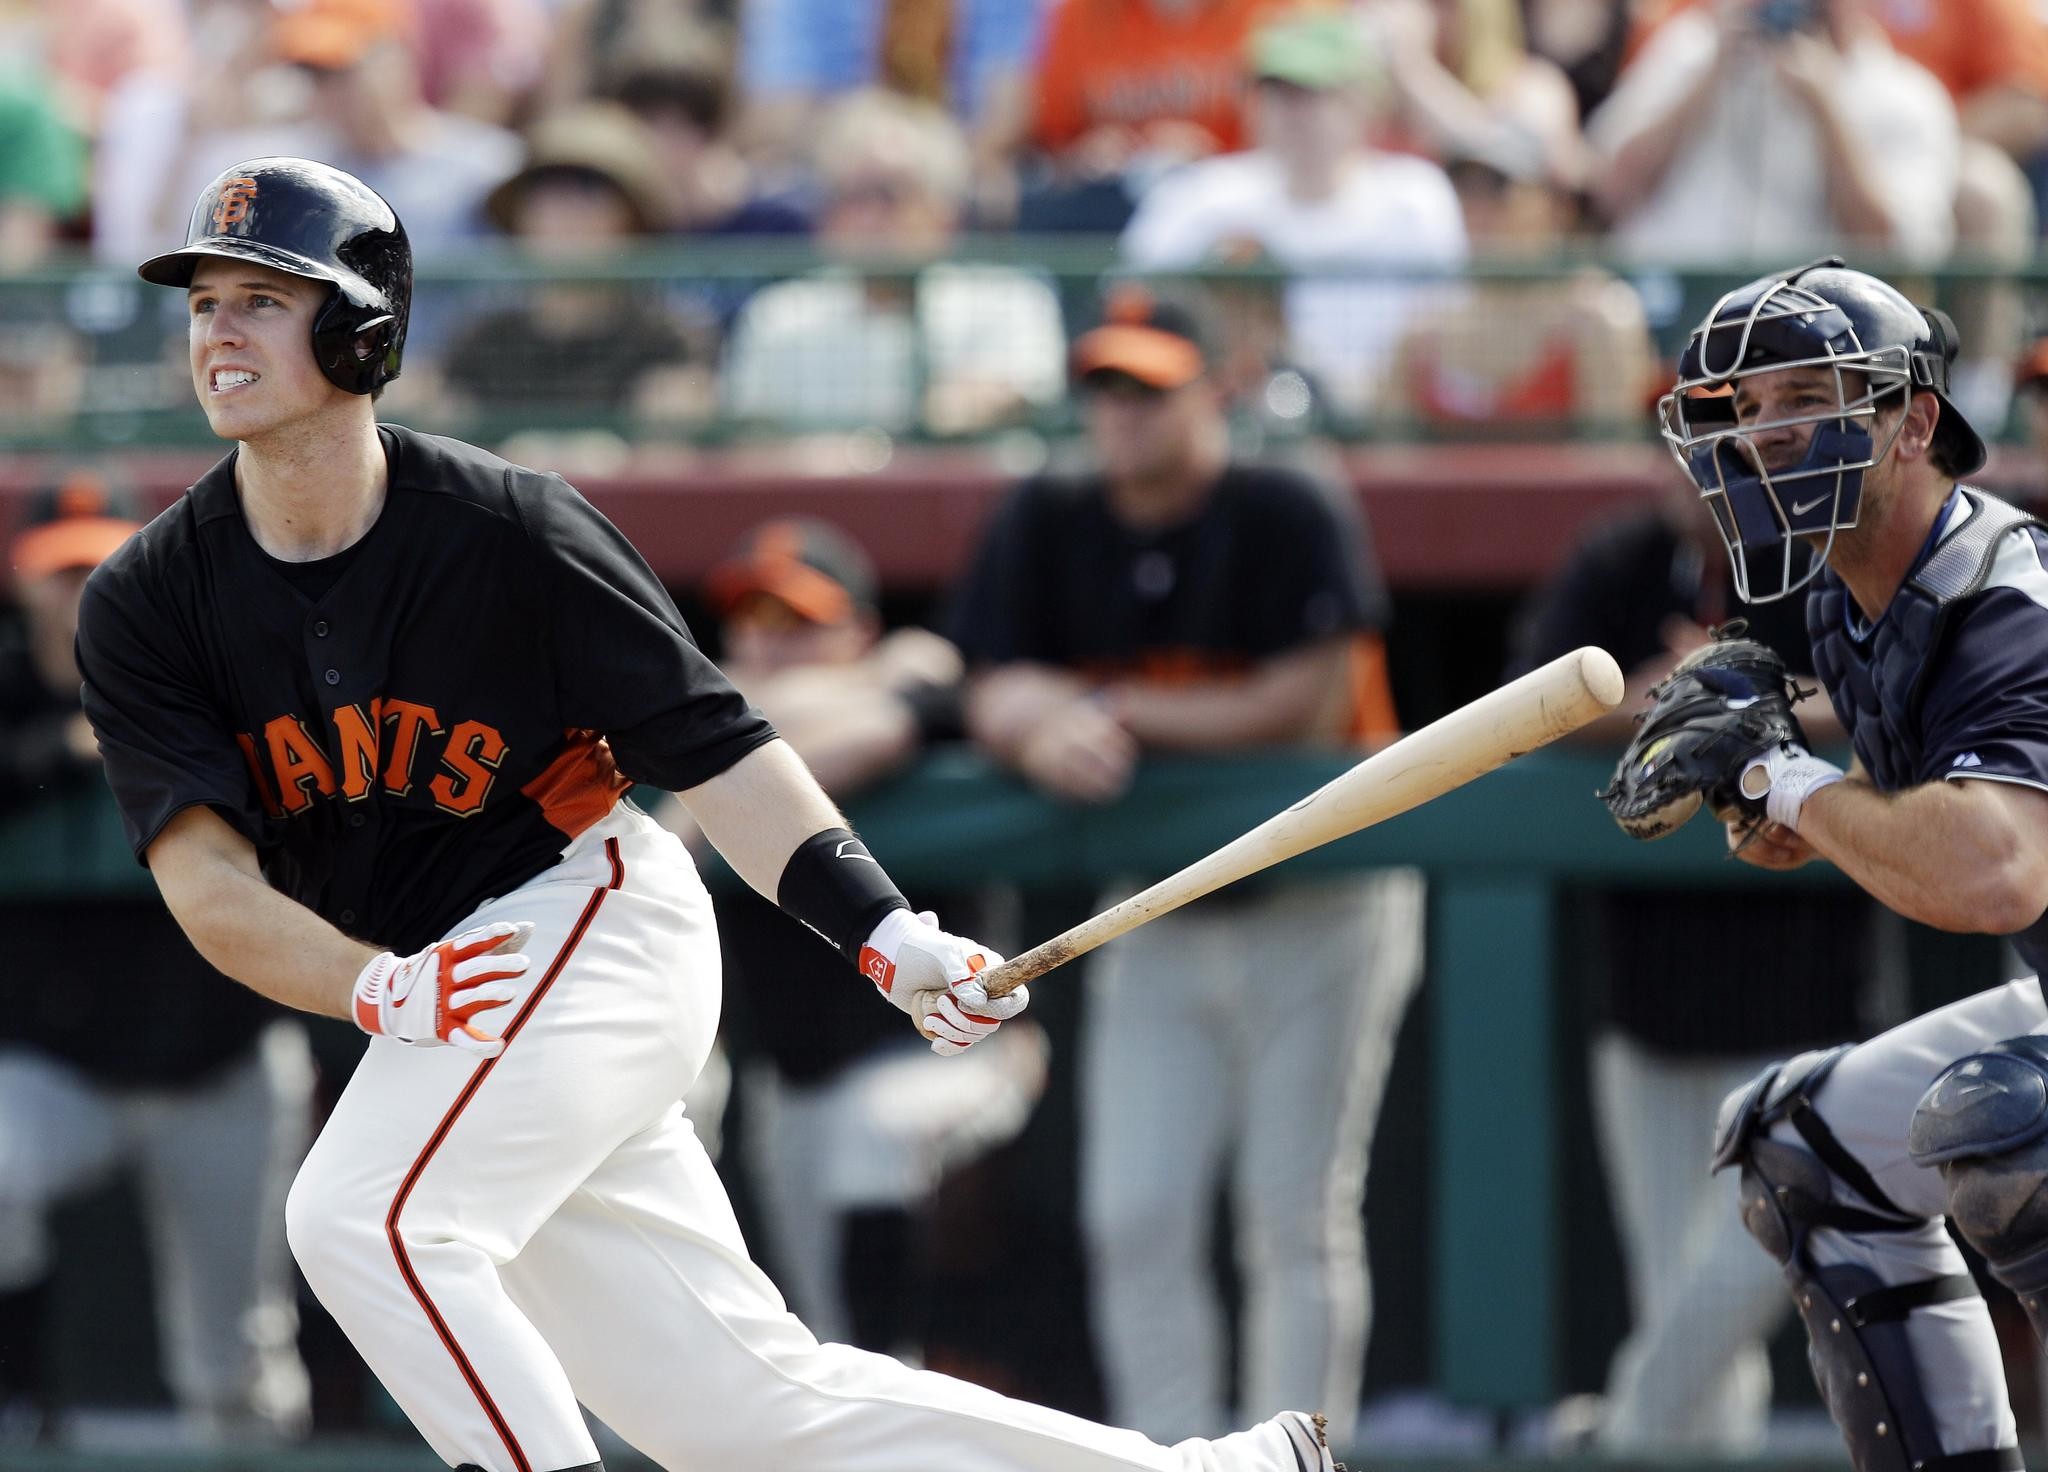 Best 25 Buster posey ideas on Pinterest